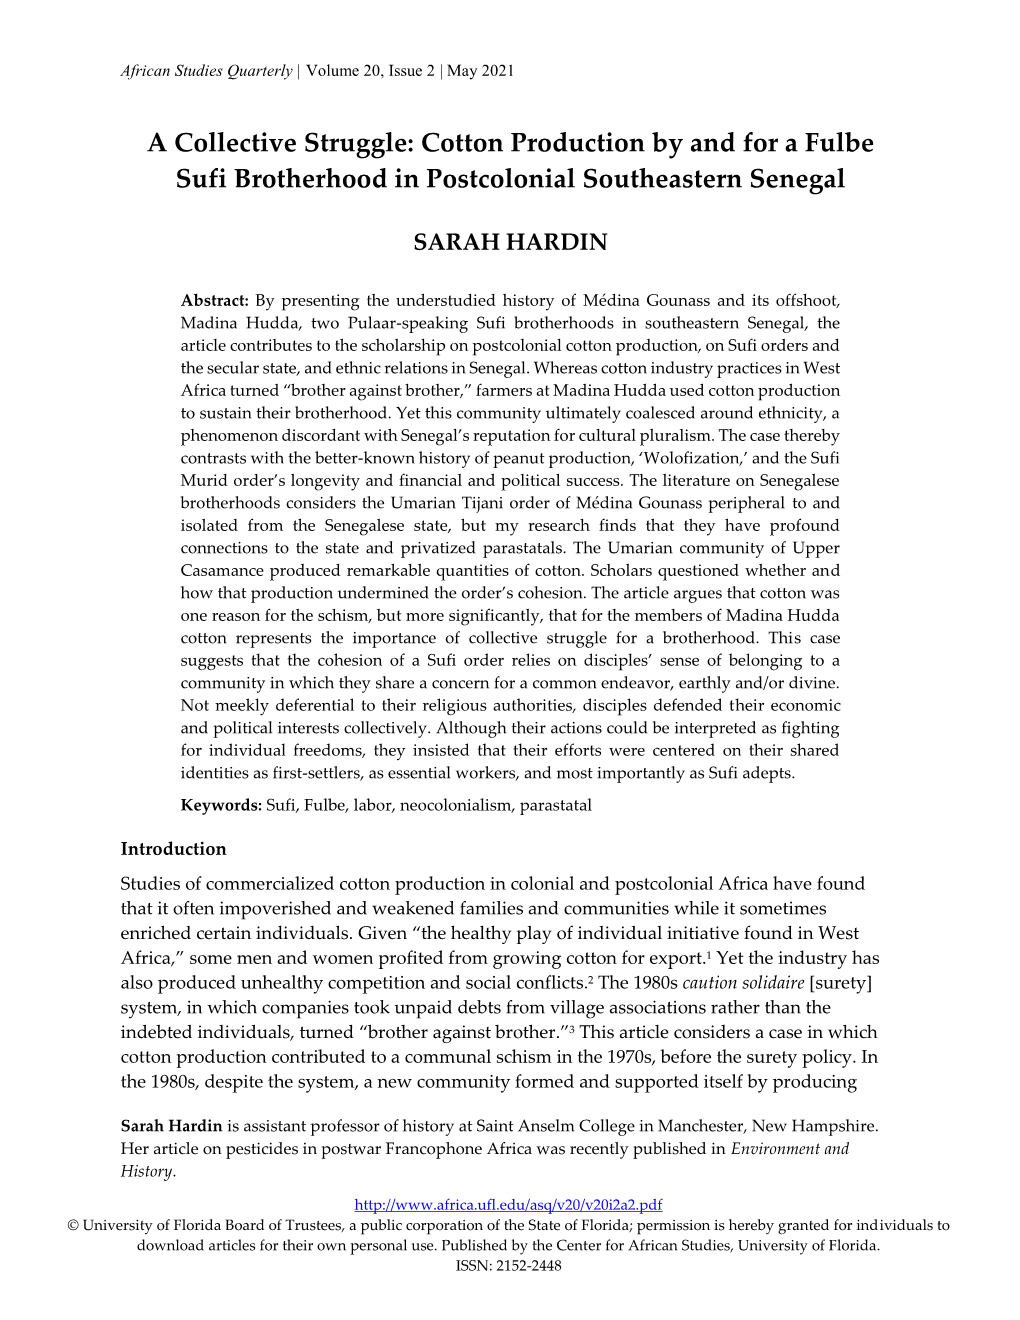 Cotton Production by and for a Fulbe Sufi Brotherhood in Postcolonial Southeastern Senegal